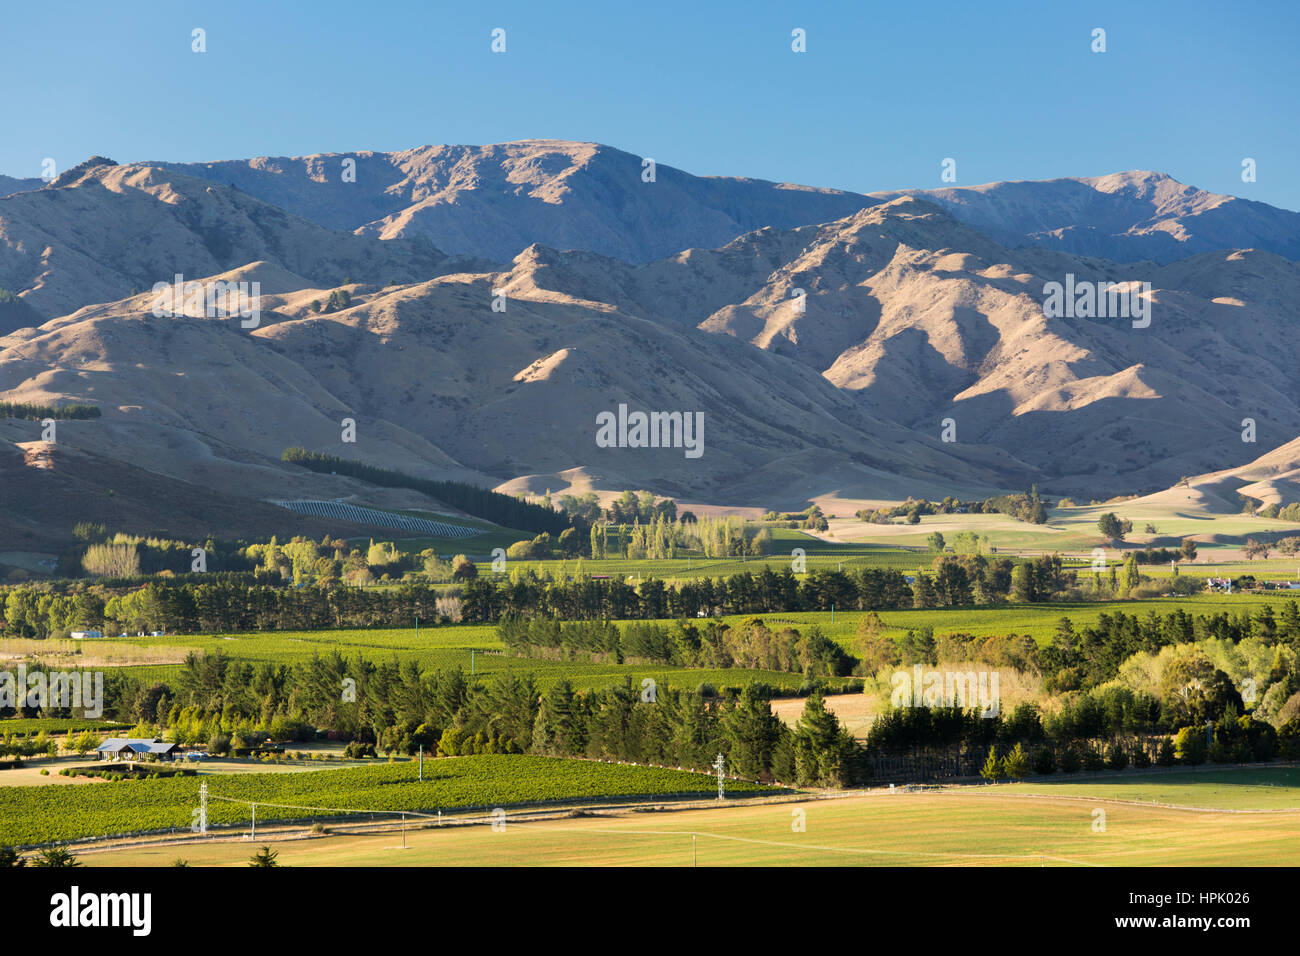 Blenheim, Marlborough, New Zealand. View over vineyards in the Wairau Valley to the arid slopes of the Wither Hills. Stock Photo